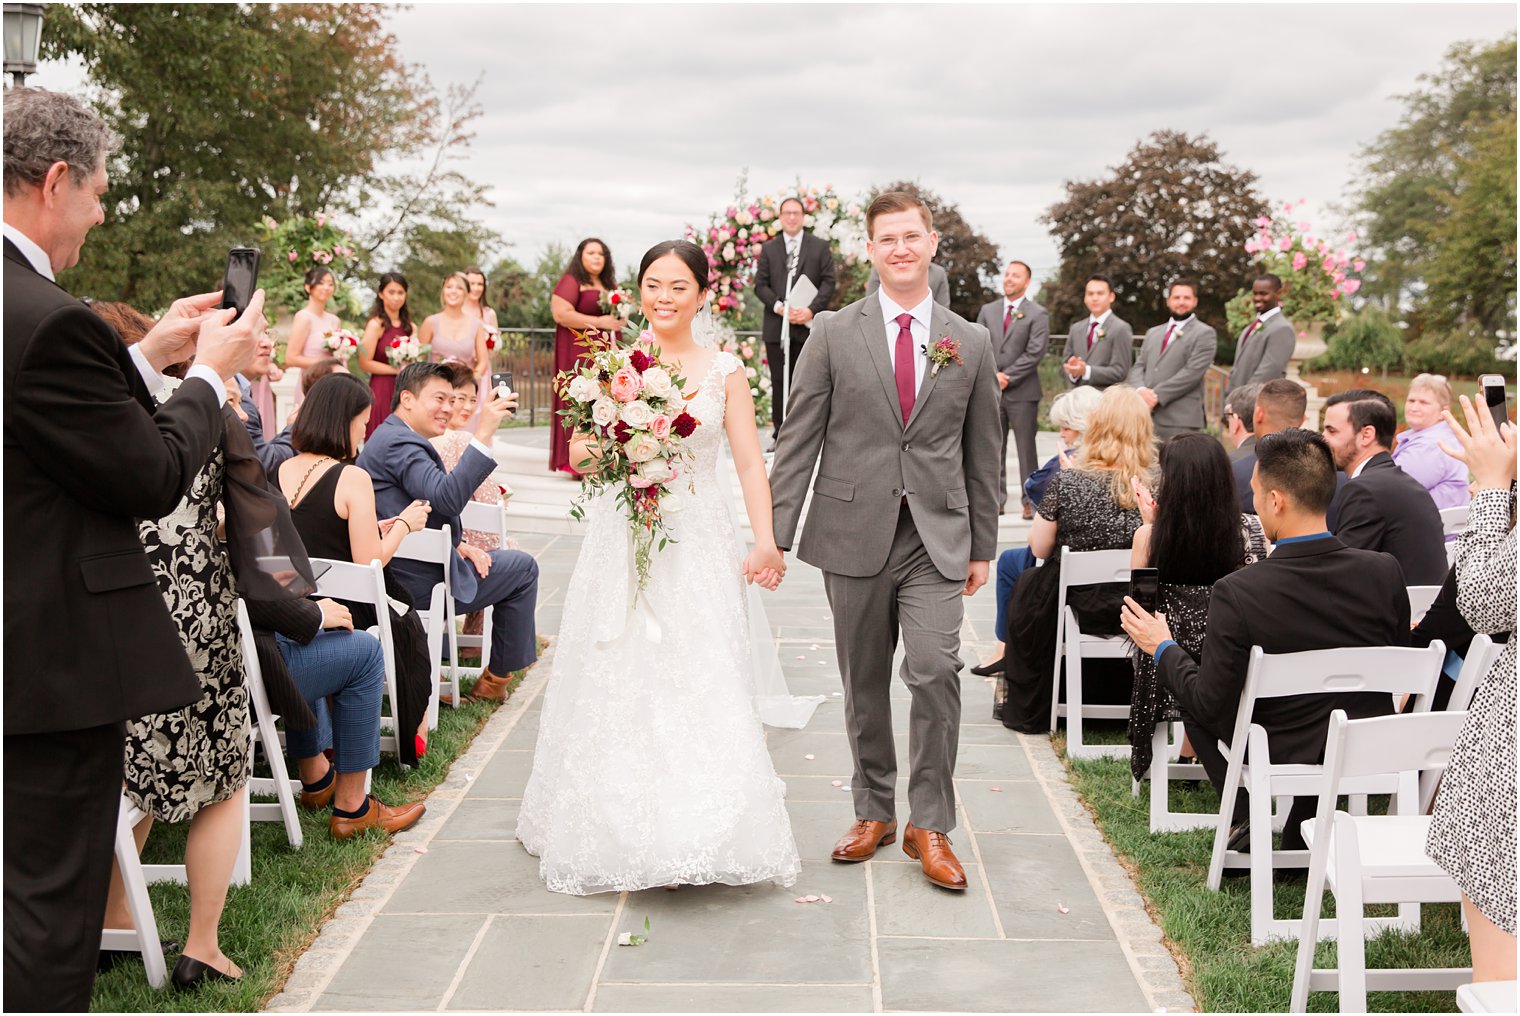 Outdoor wedding ceremony at Park Chateau Estate